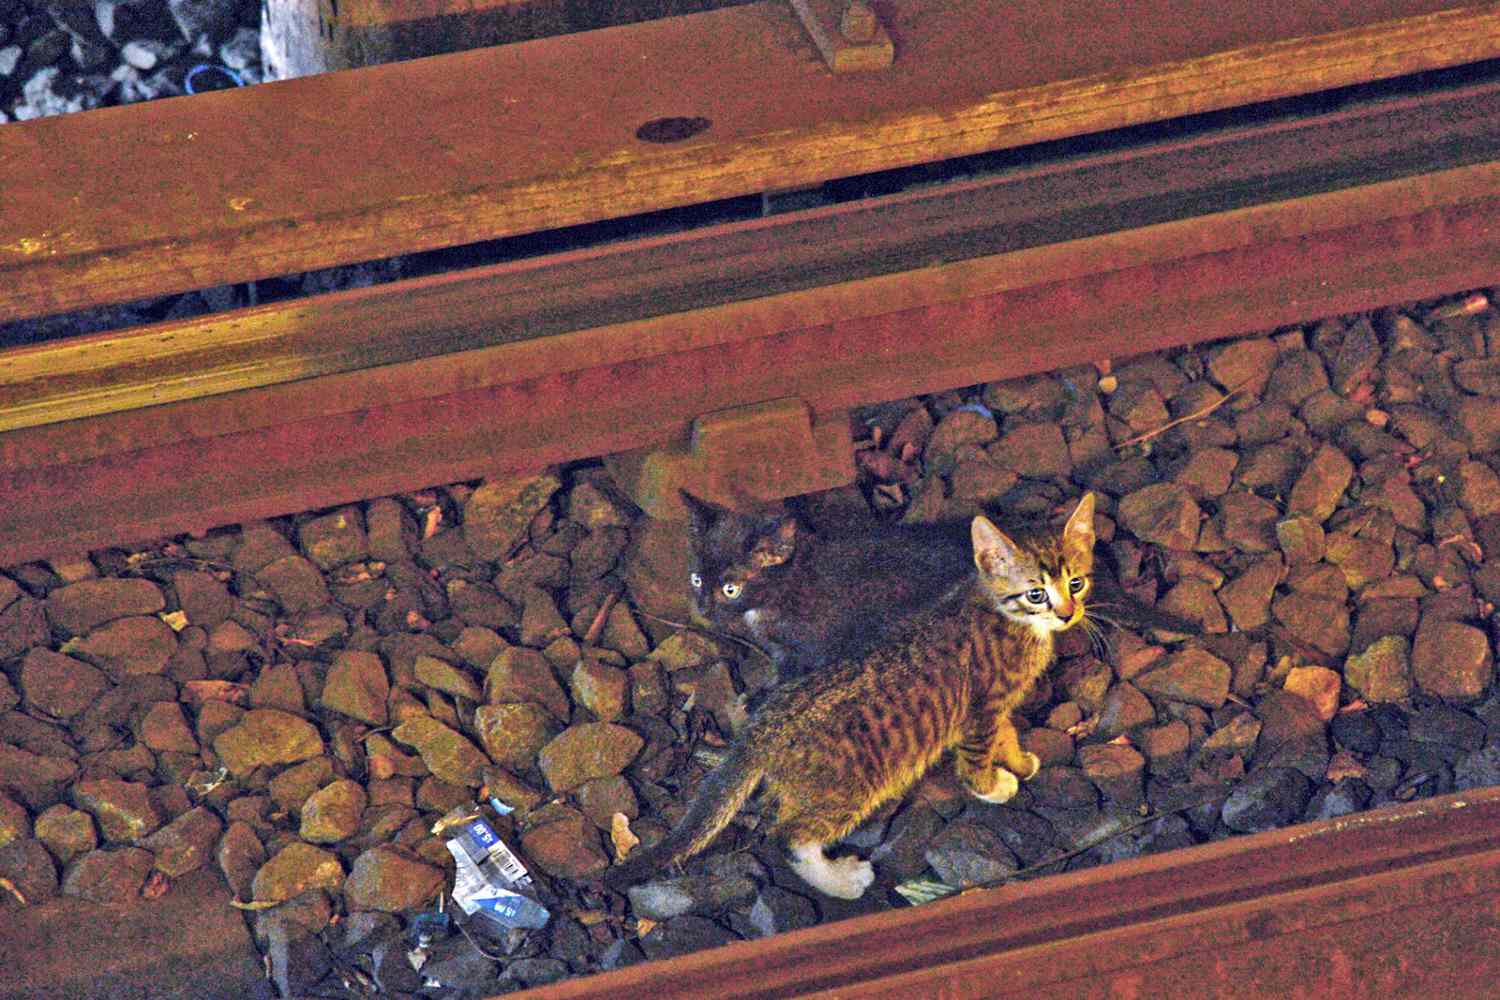 MTA Worker (and Lifelong Animal Lover) Saves Stray Cats From Train Tracks